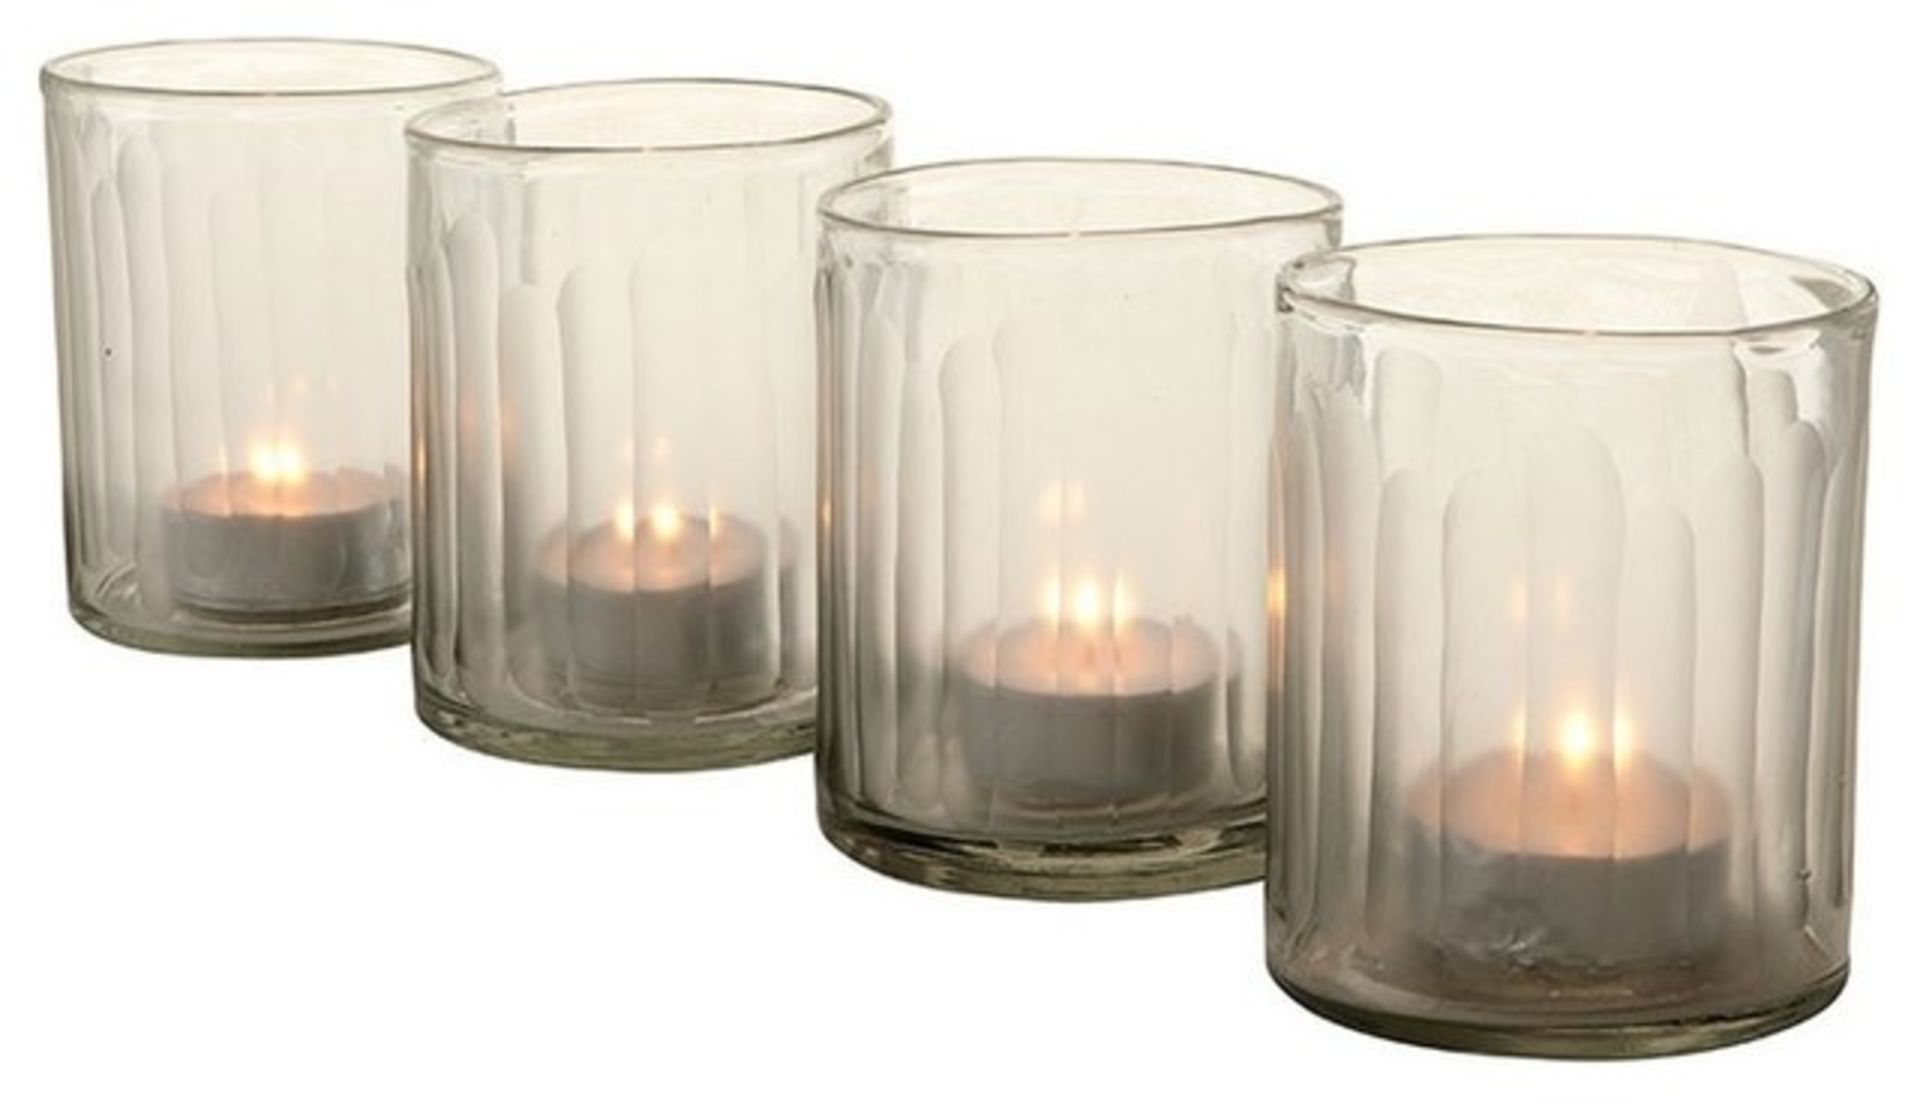 4 x EICHHOLTZ BV "Astor" Frosted Glass Tealight Holders  - Ref: 3353730 - CL087 - Location: